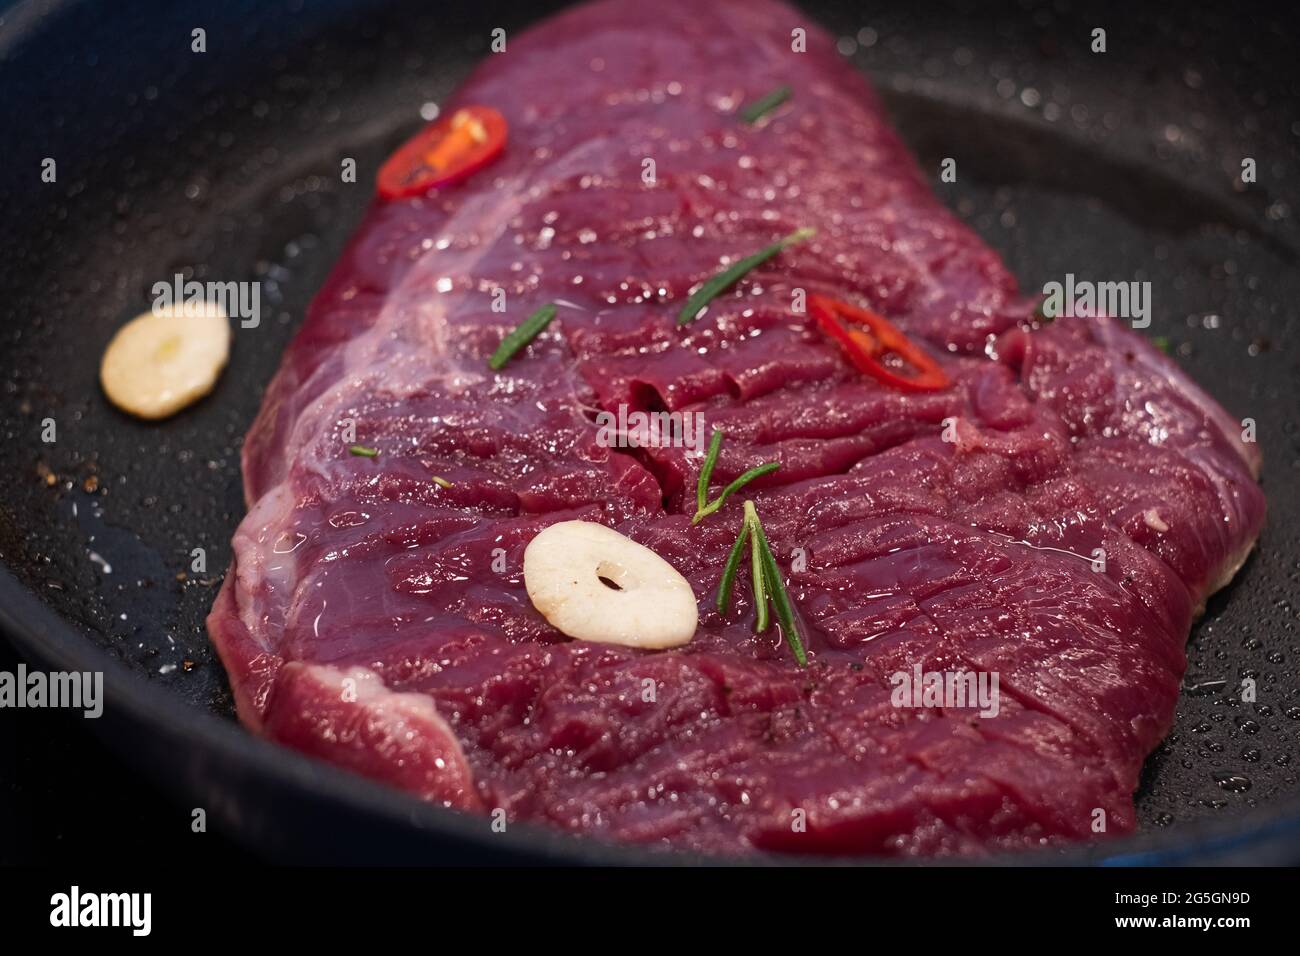 Raw red meet frying on oily pan. Cooking meat. Stock Photo